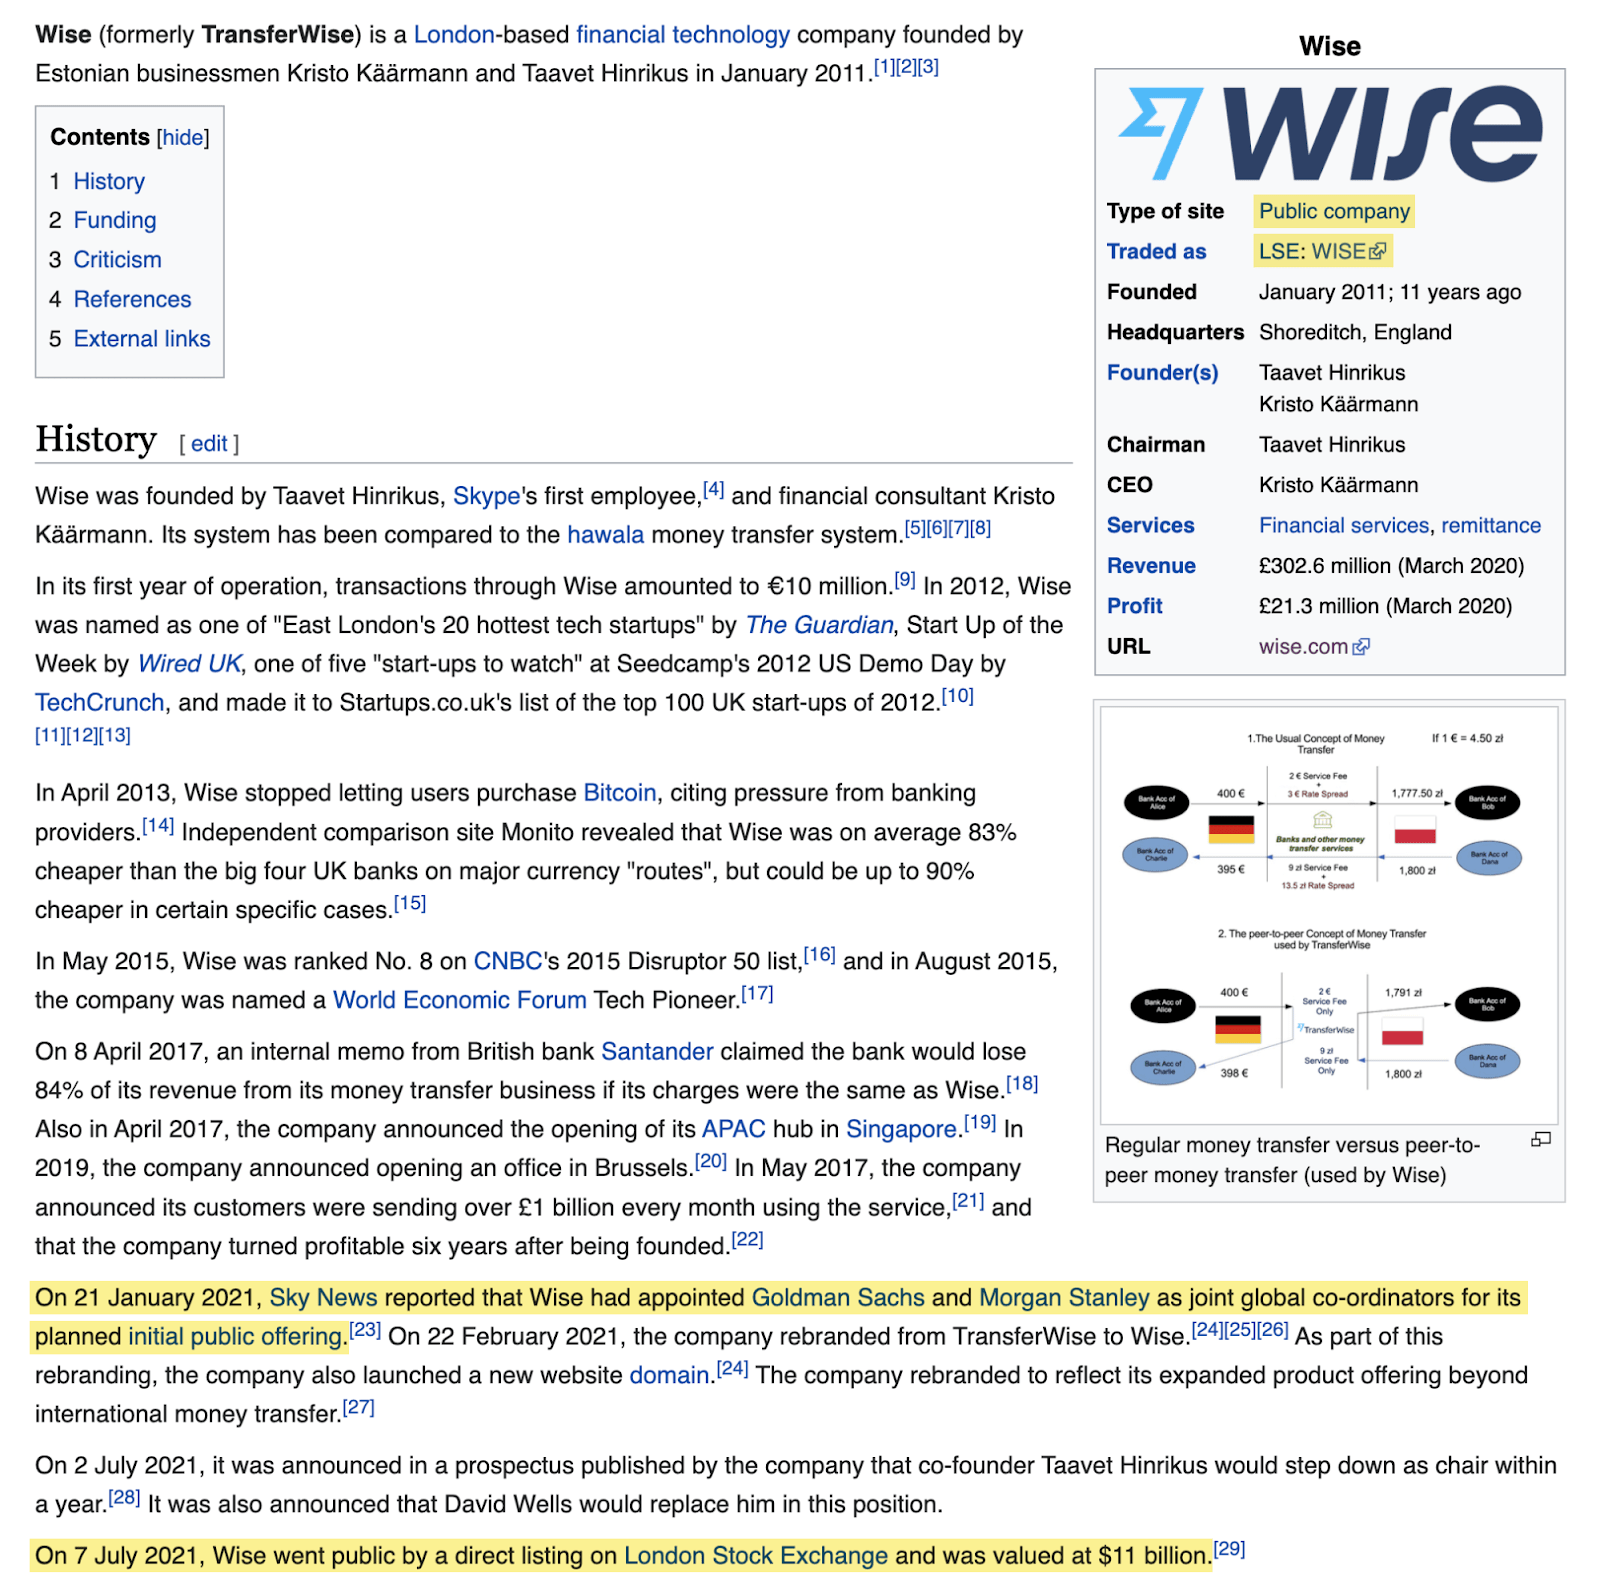 Wise listed as "public company" on its Wiki page; also, there's writeup about it going public 